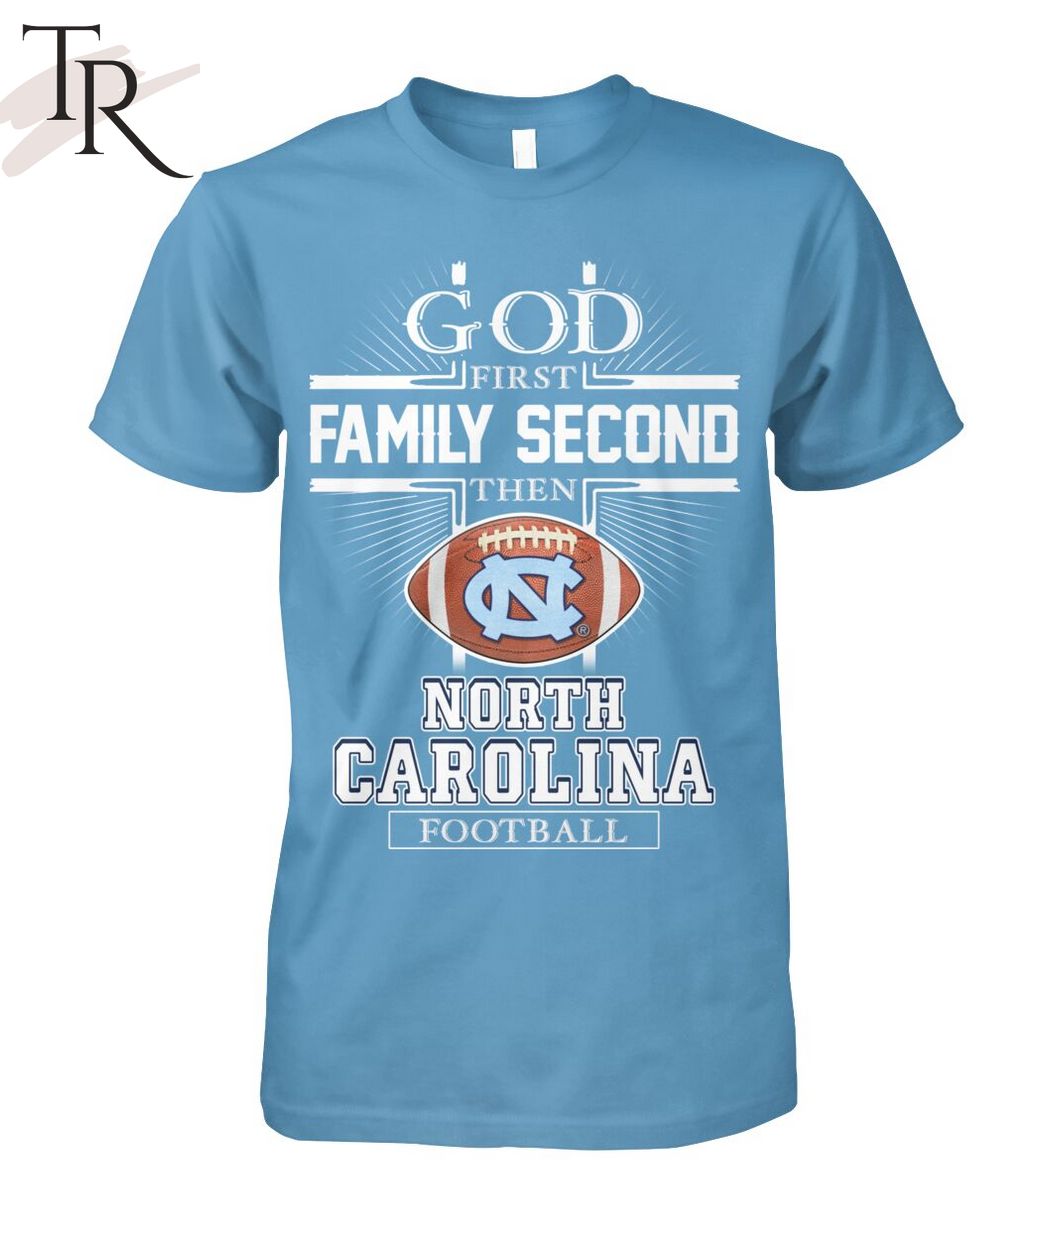 God First Family Second Then Boston Bruins Team T-shirt